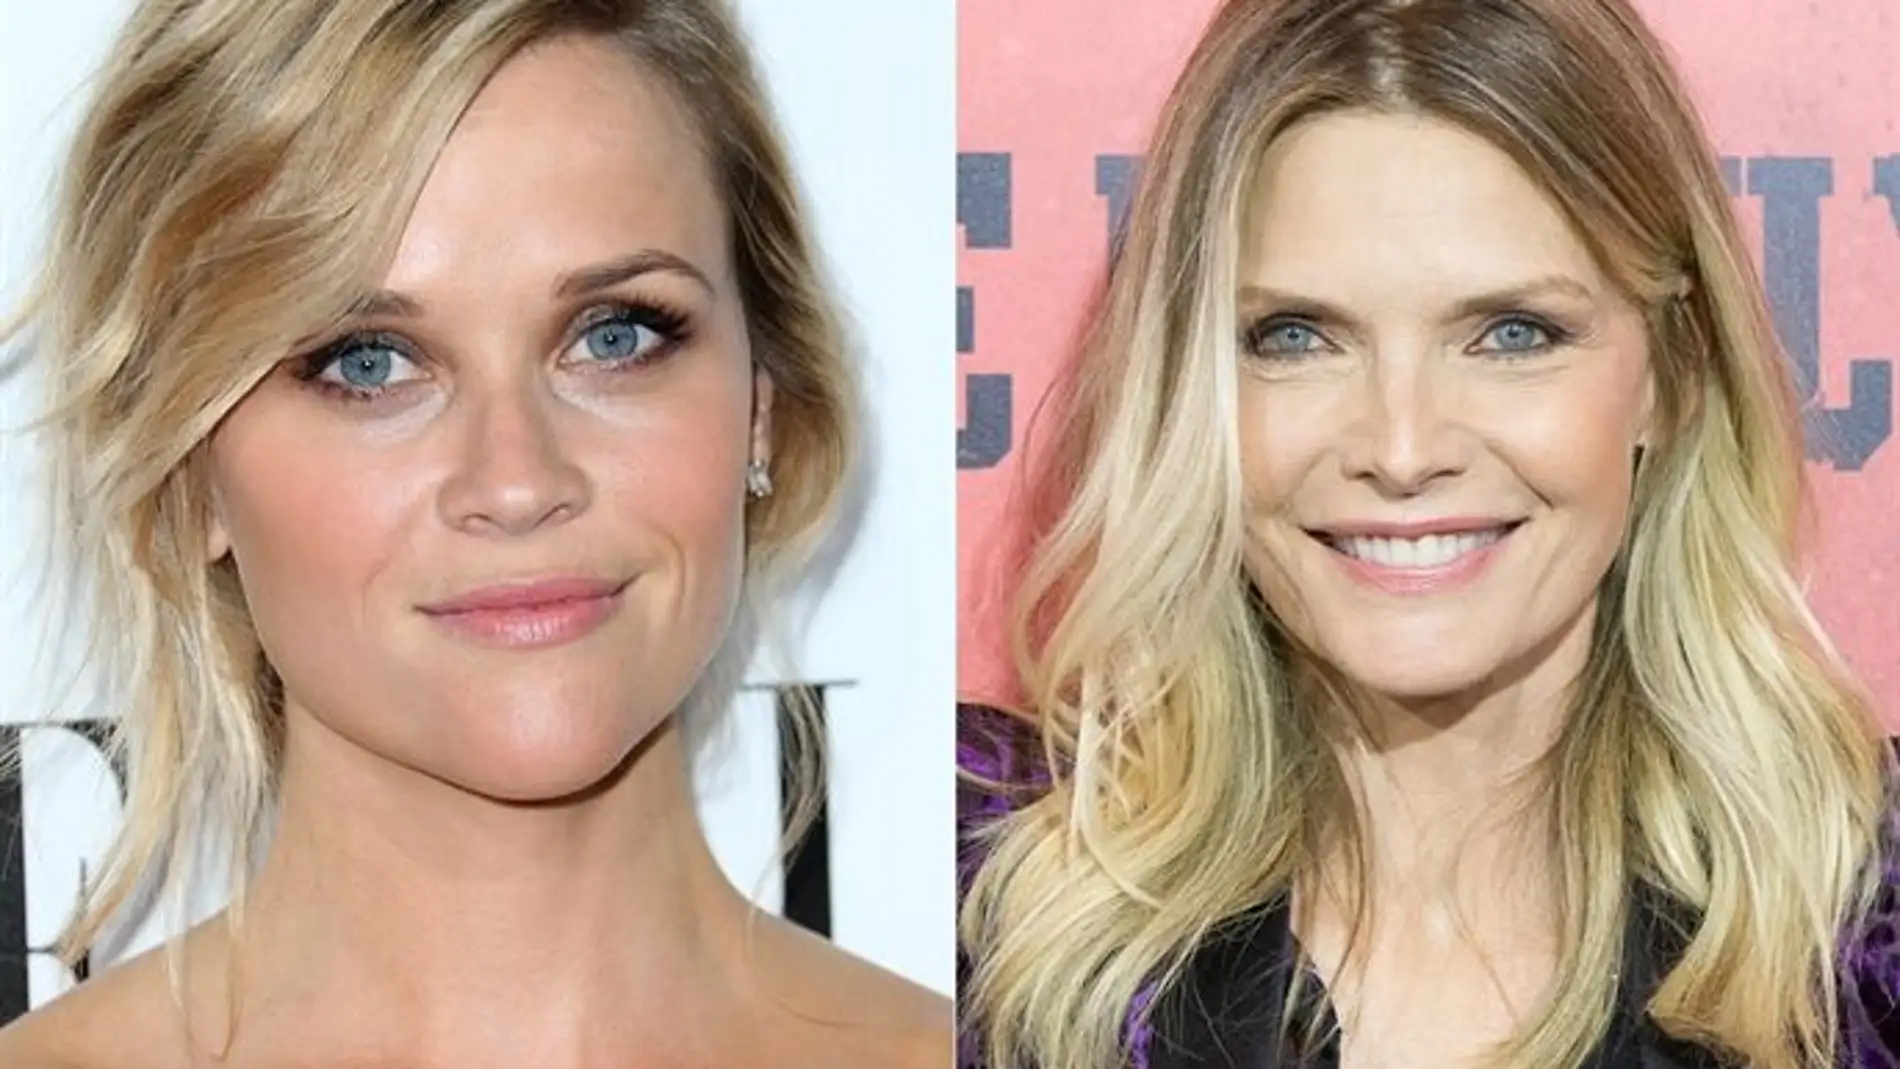 Reese Witherspoon y Michelle Pfeiffer